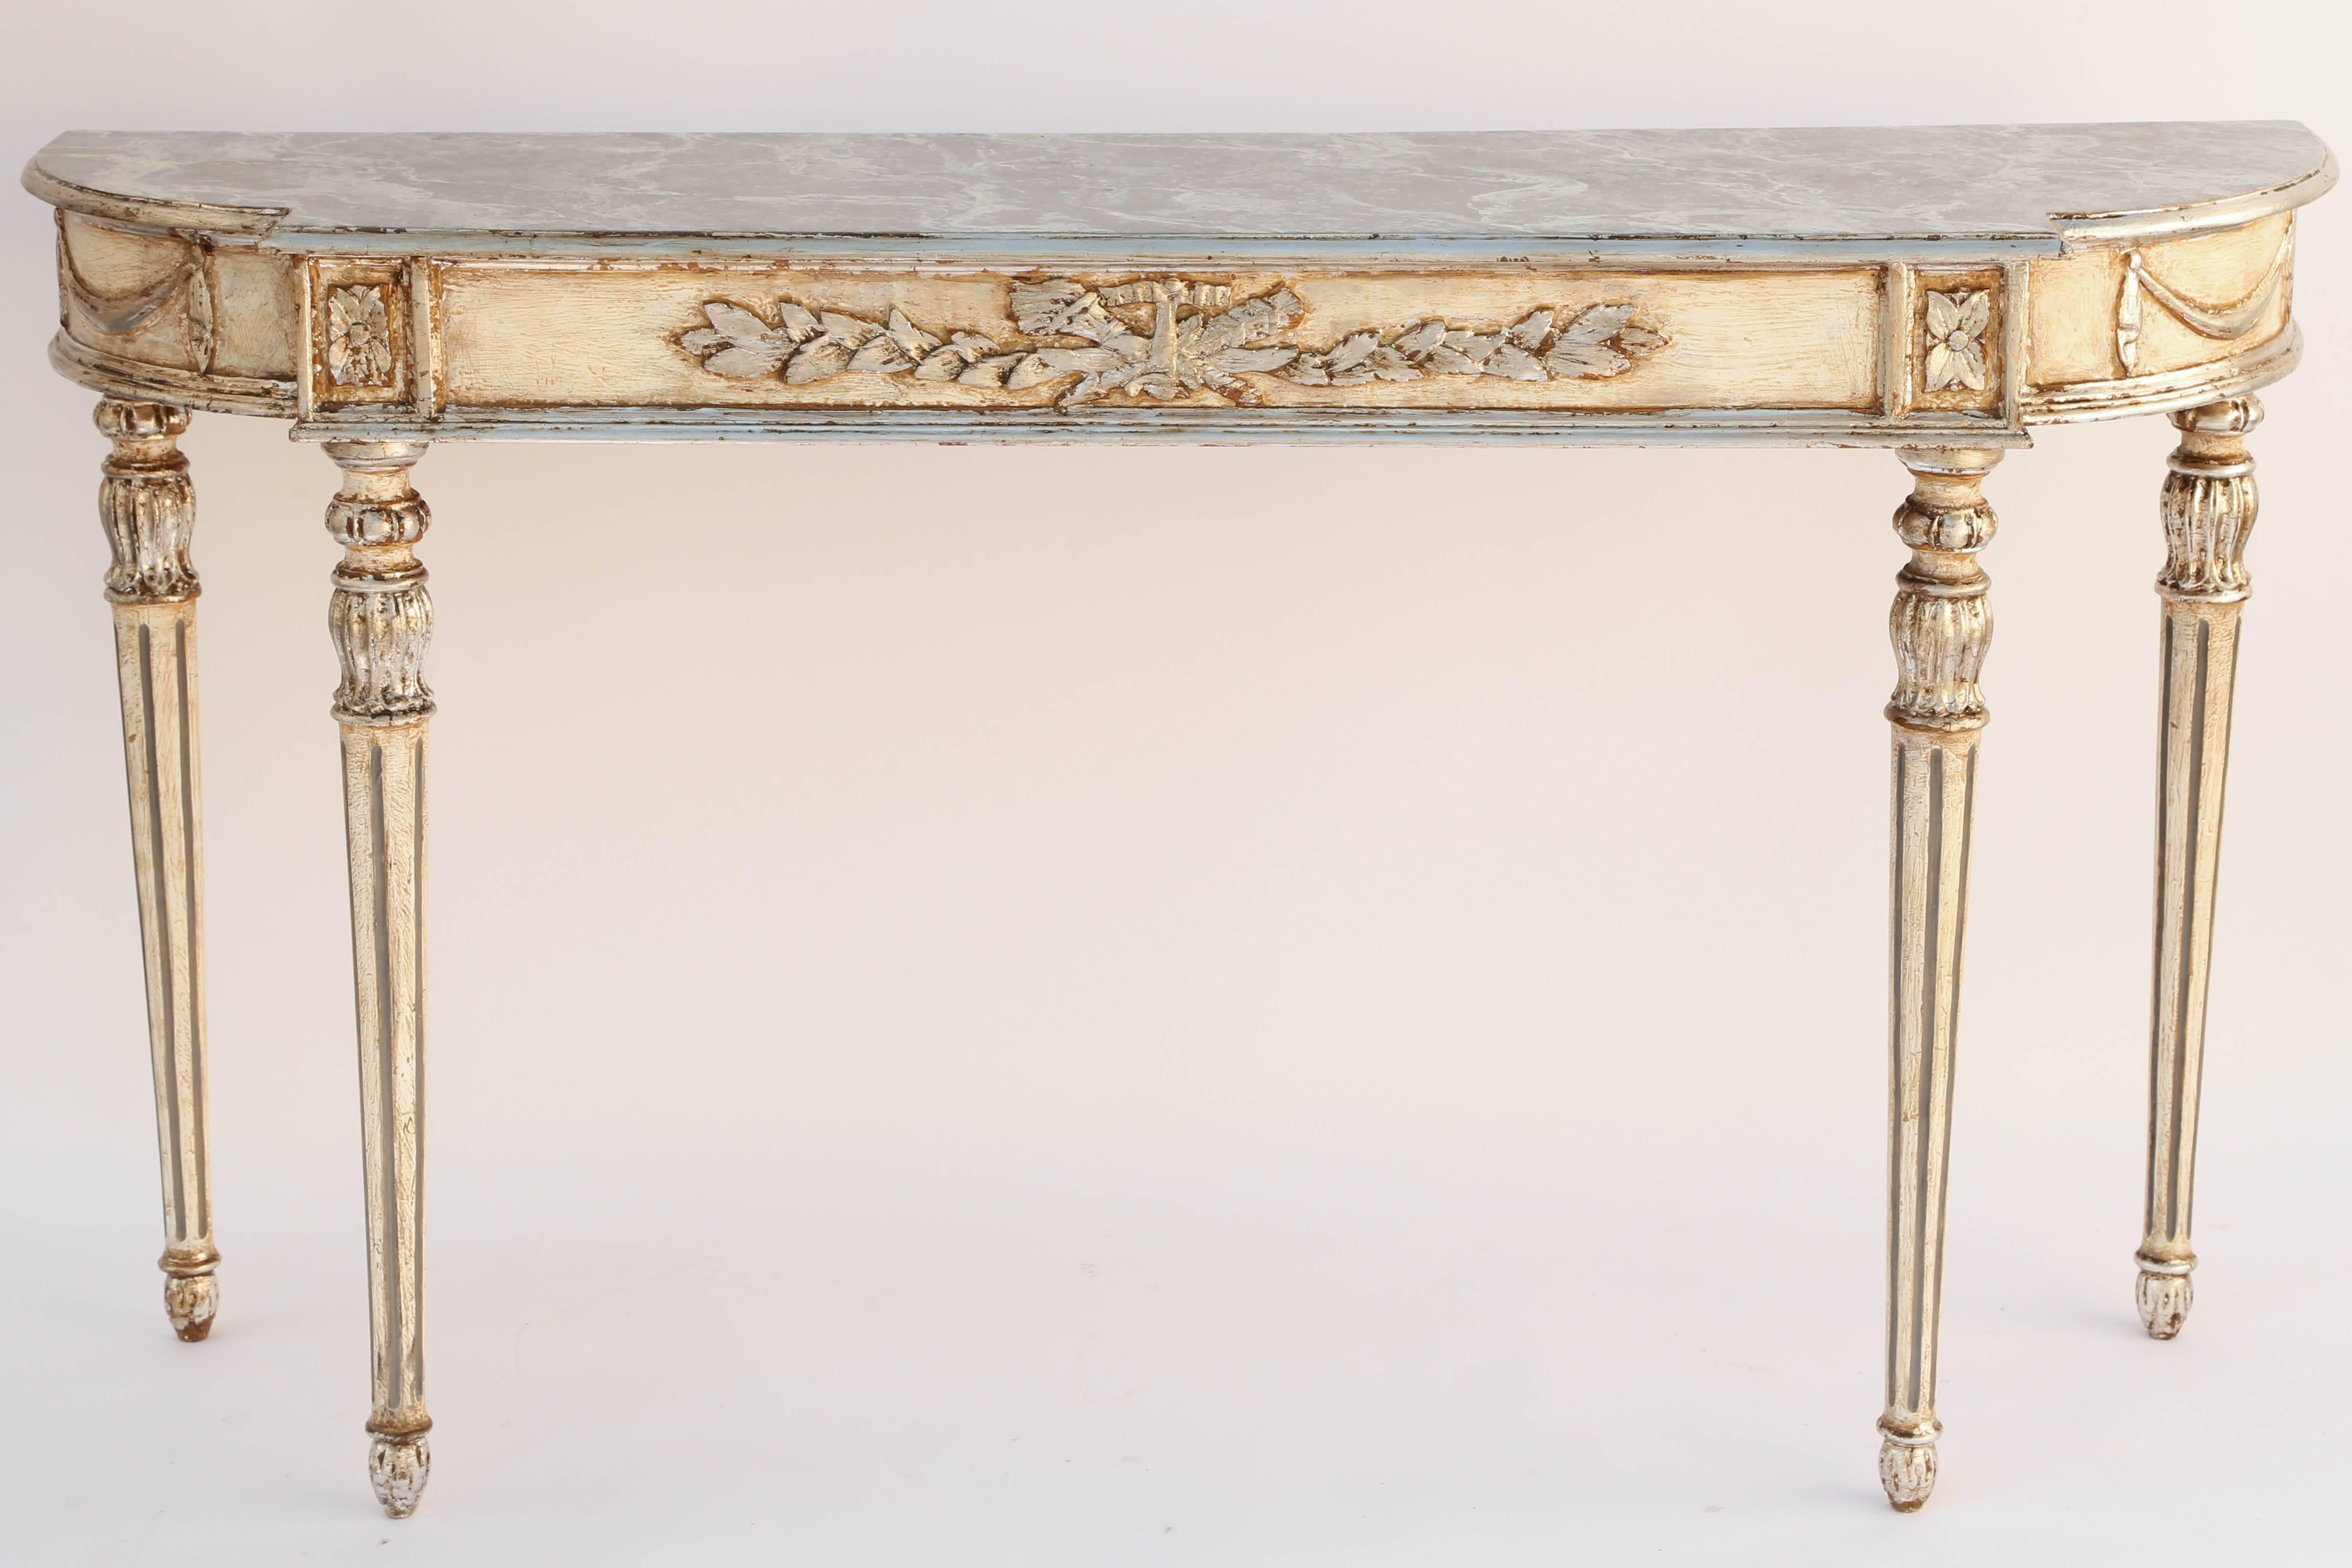 Console, having a molded, D-shaped, marbleized top, on painted and parcel silver gilt base, its fielded apron out carved with torch and quiver, flanked by laureling, with swags on each rounded corner, raised on four, fluted, tapering legs.

Stock